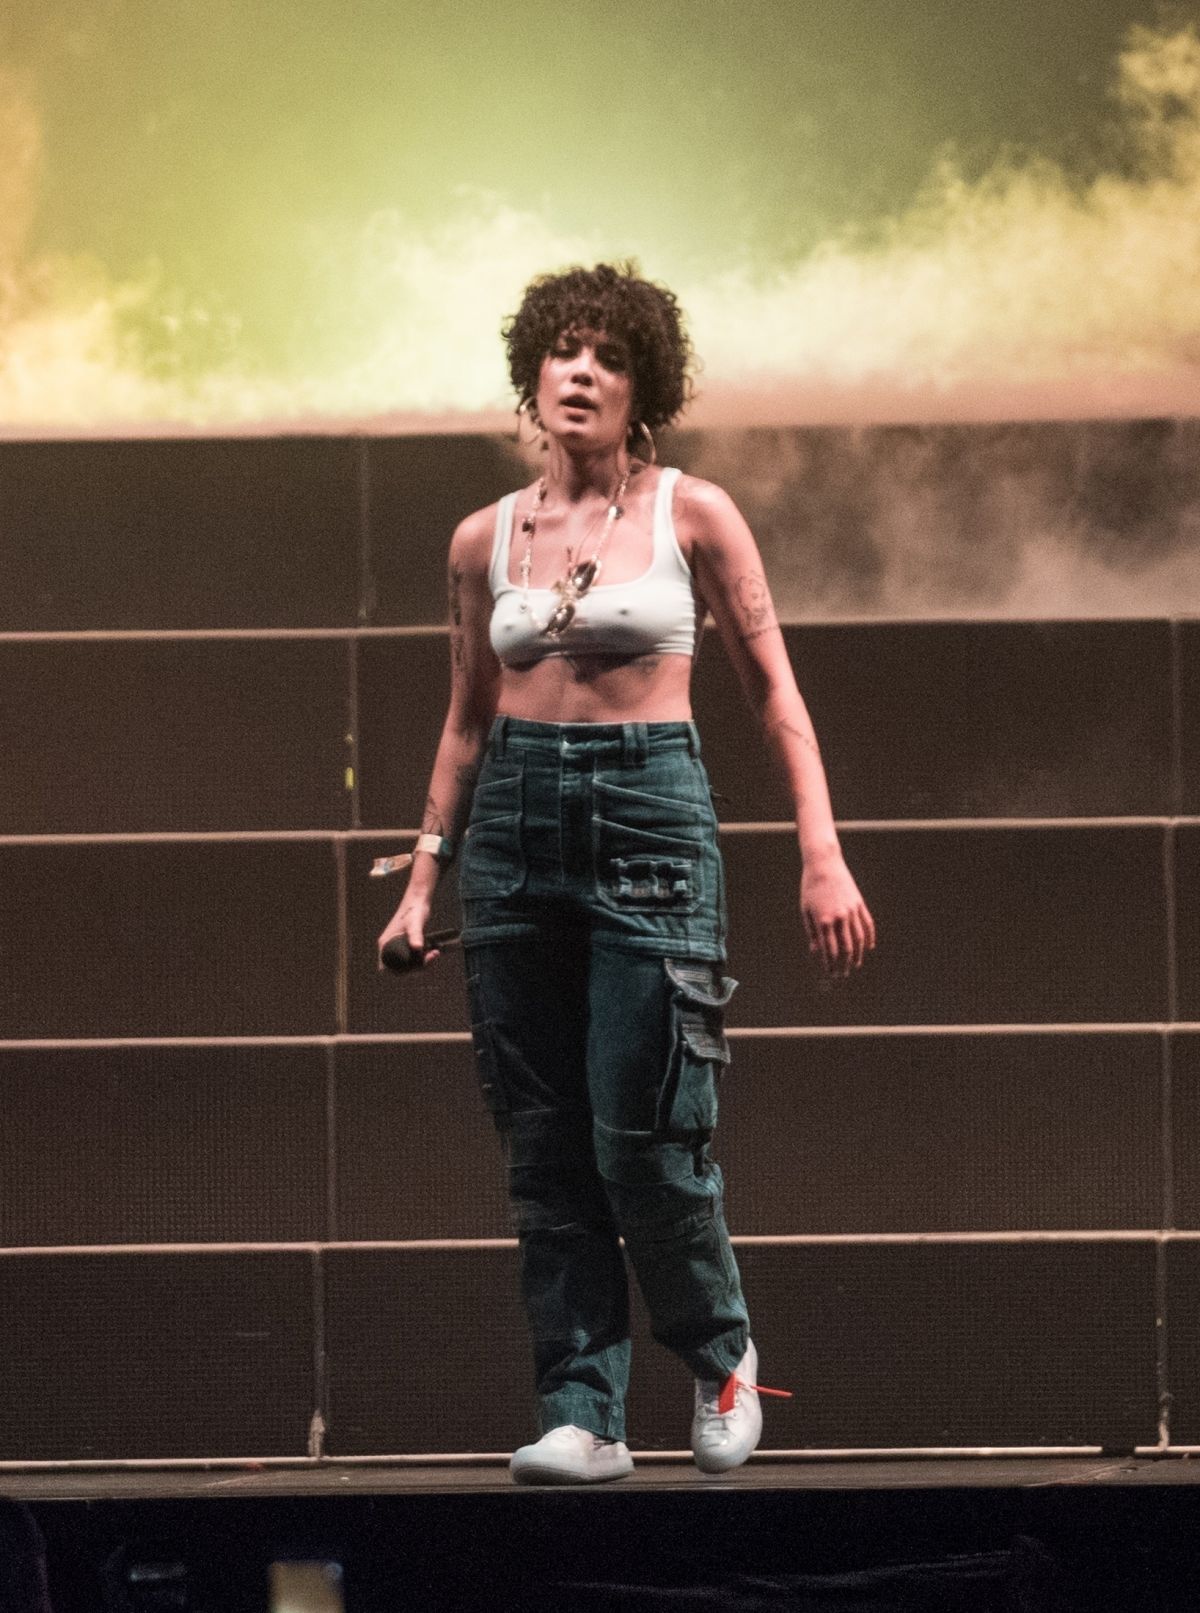 halsey-performs-at-hangout-music-festival-in-gulf-shores-05-19-2018-0.jpg